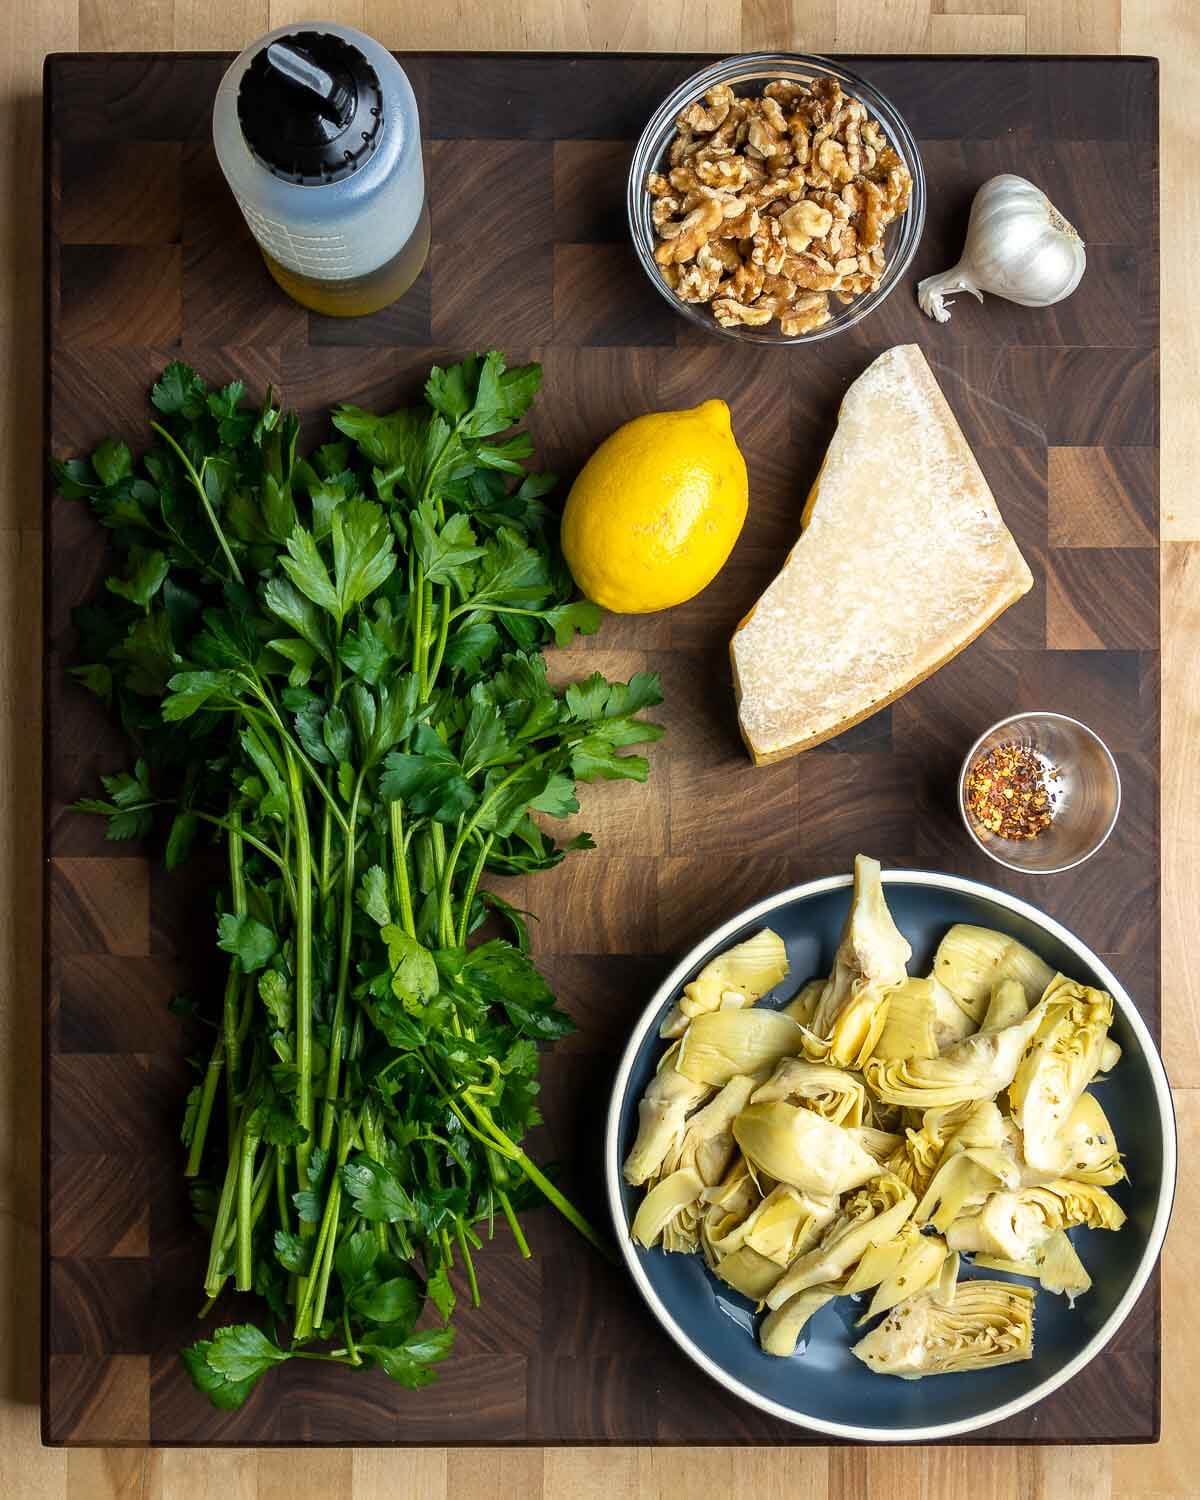 Ingredients shown: extra virgin olive oil, walnuts, garlic, parsley, lemons, Parmigiano Reggiano, hot red pepper flakes, and artichoke hearts.